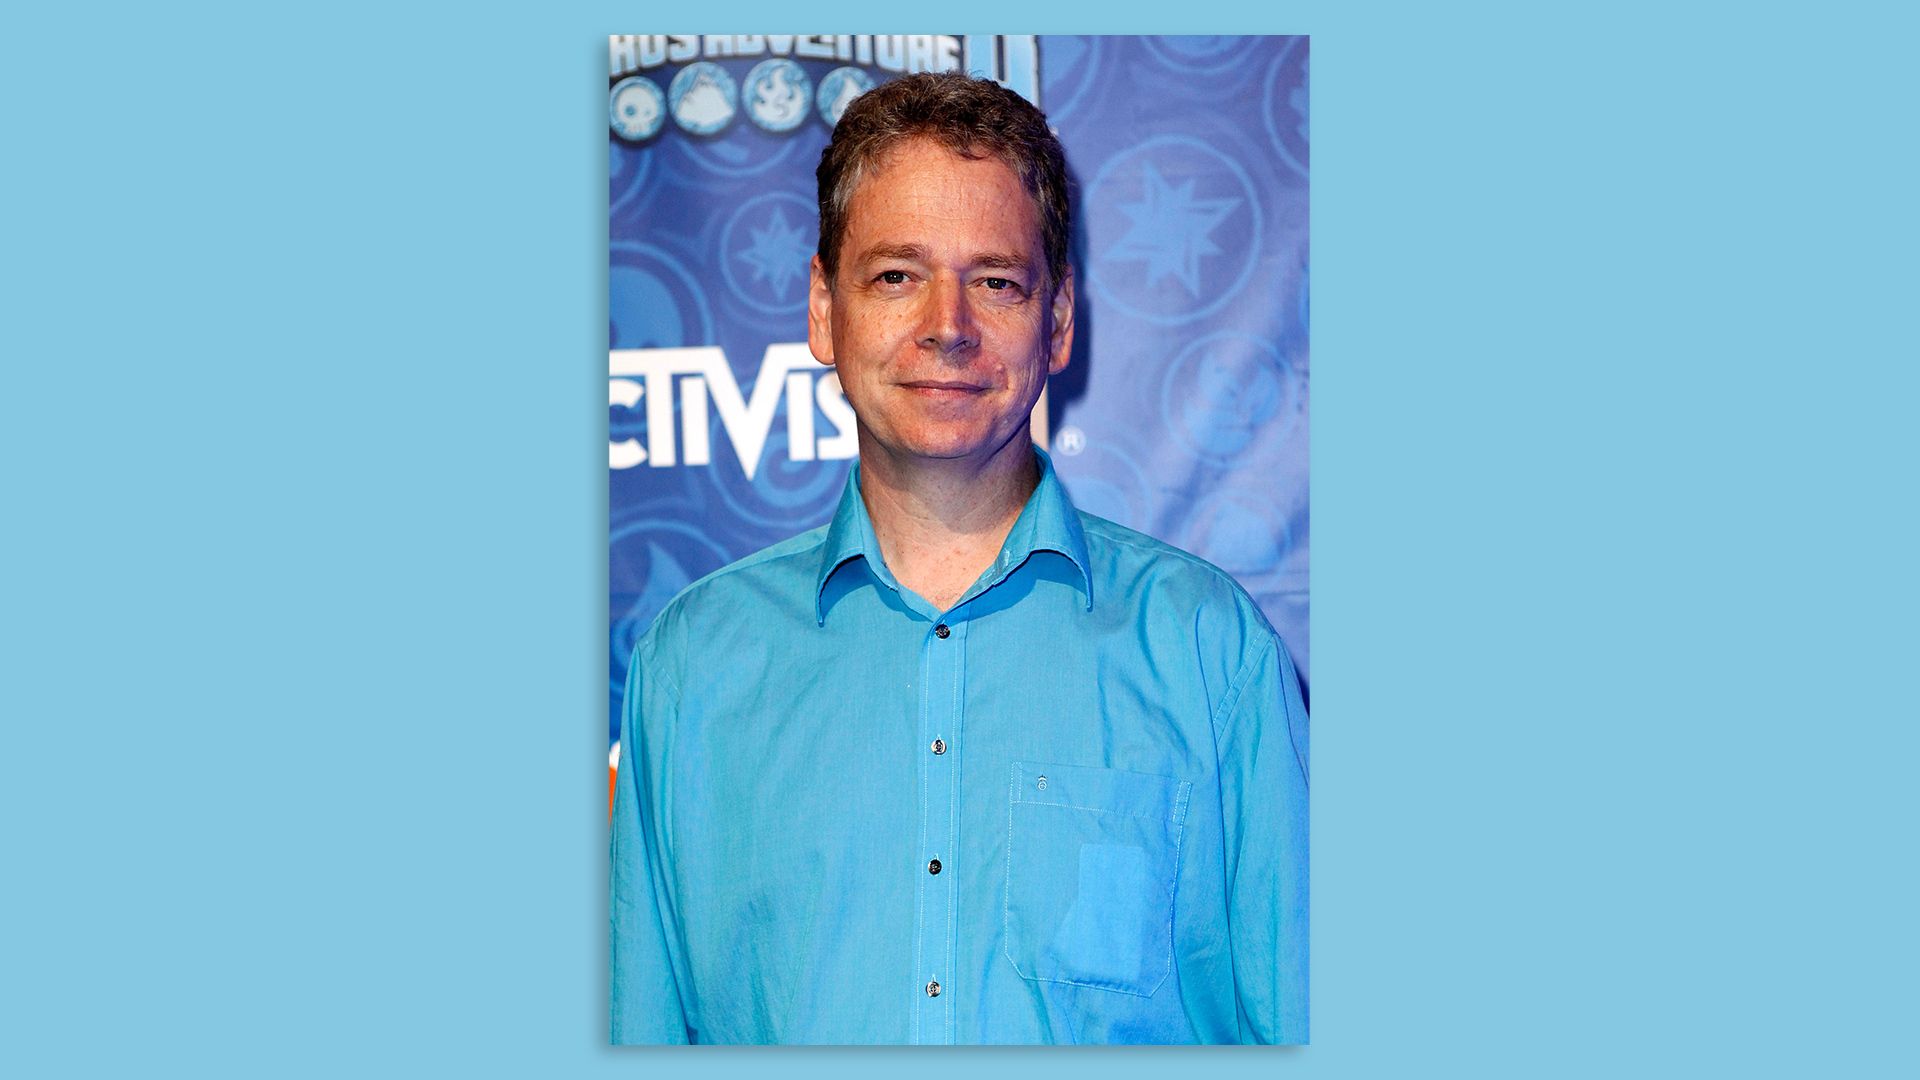 Photo of a man in a blue dress shirt in front of an Activision logo